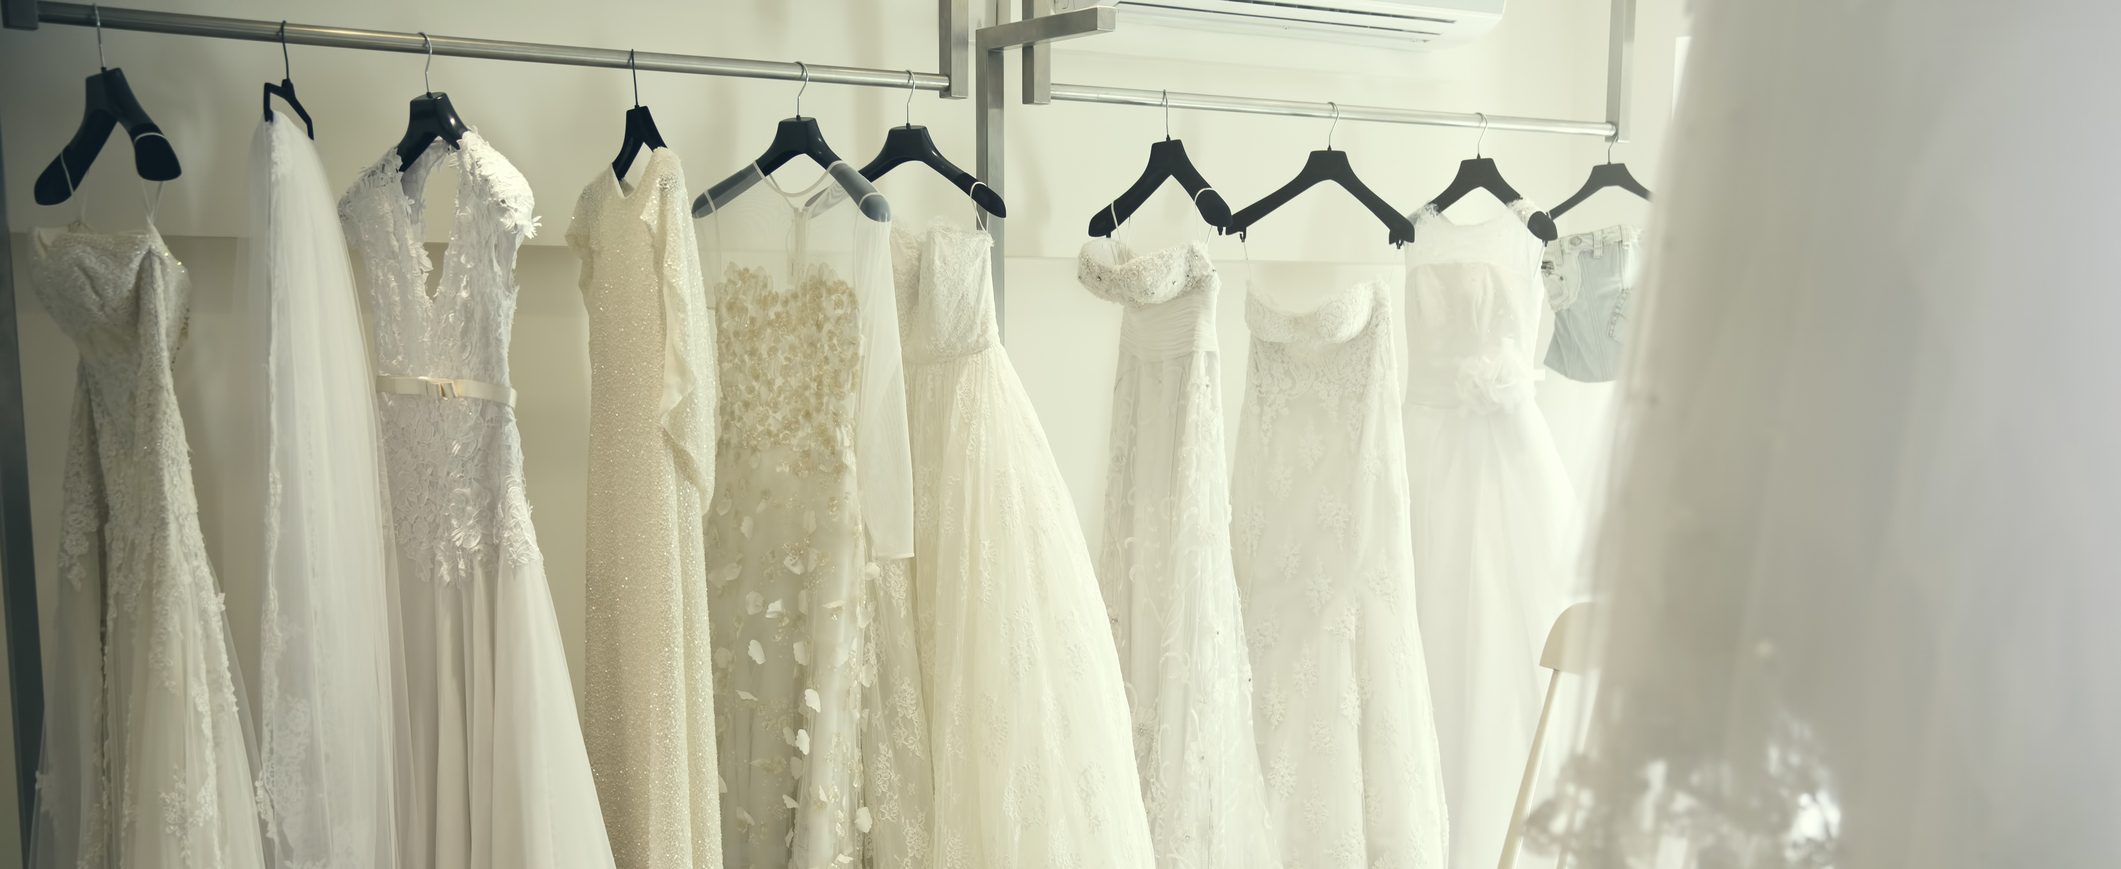 Wedding dresses hang in a row on a hangers.